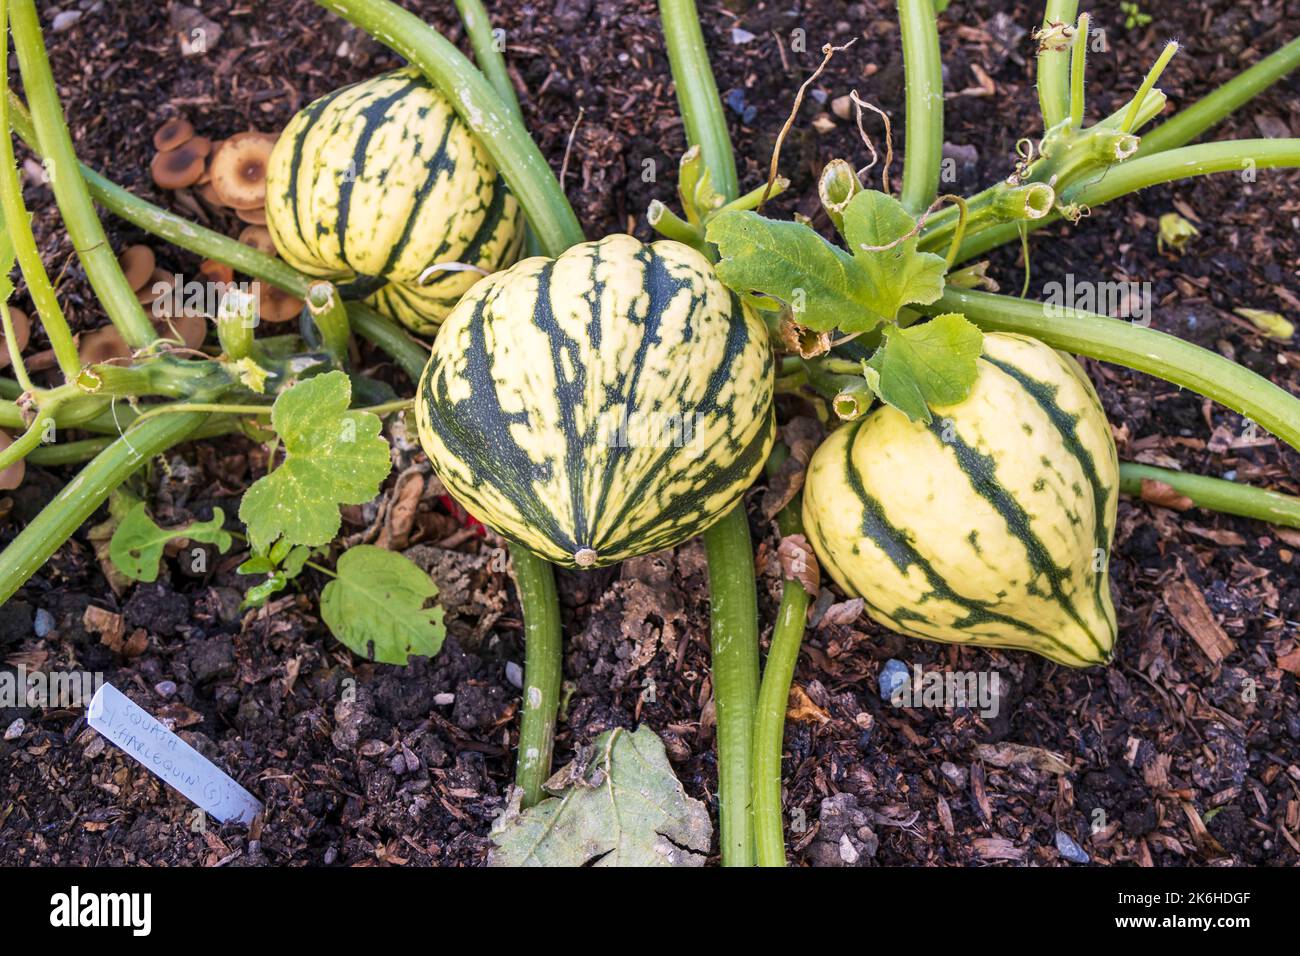 Stripy small Harlequin squash growing in a potager garden. Stock Photo